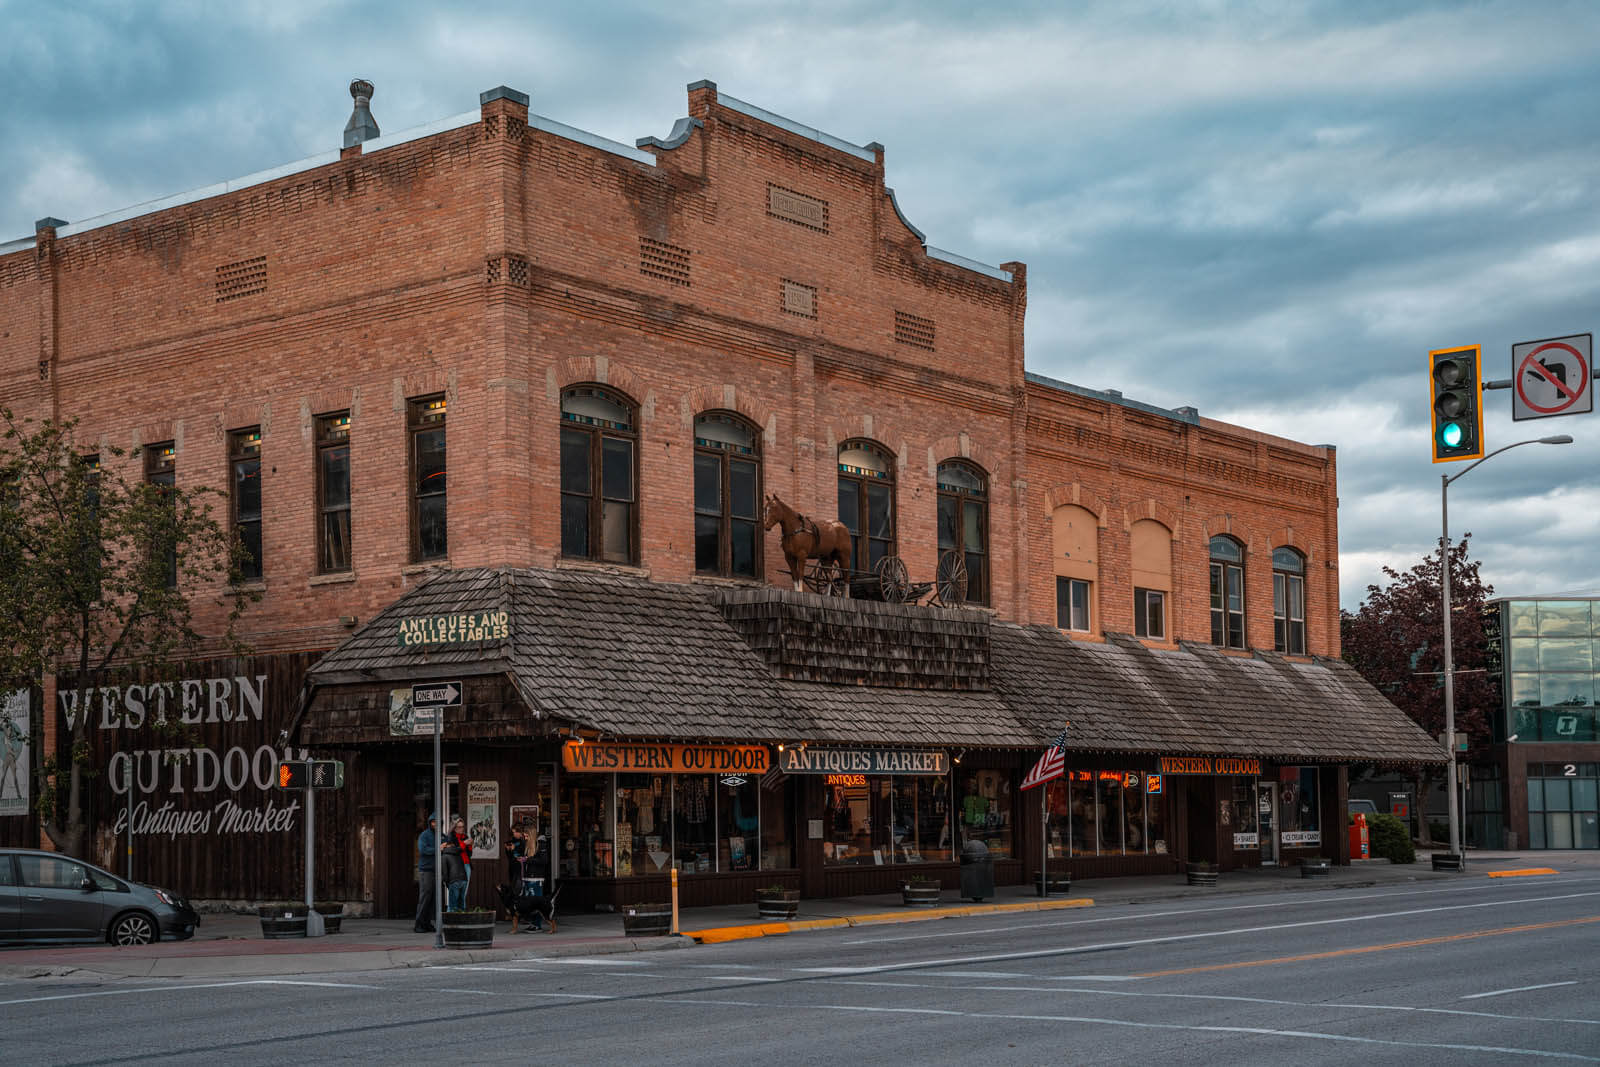 Western Outdoor and Antique Shop in Downtown Kalispell Montana